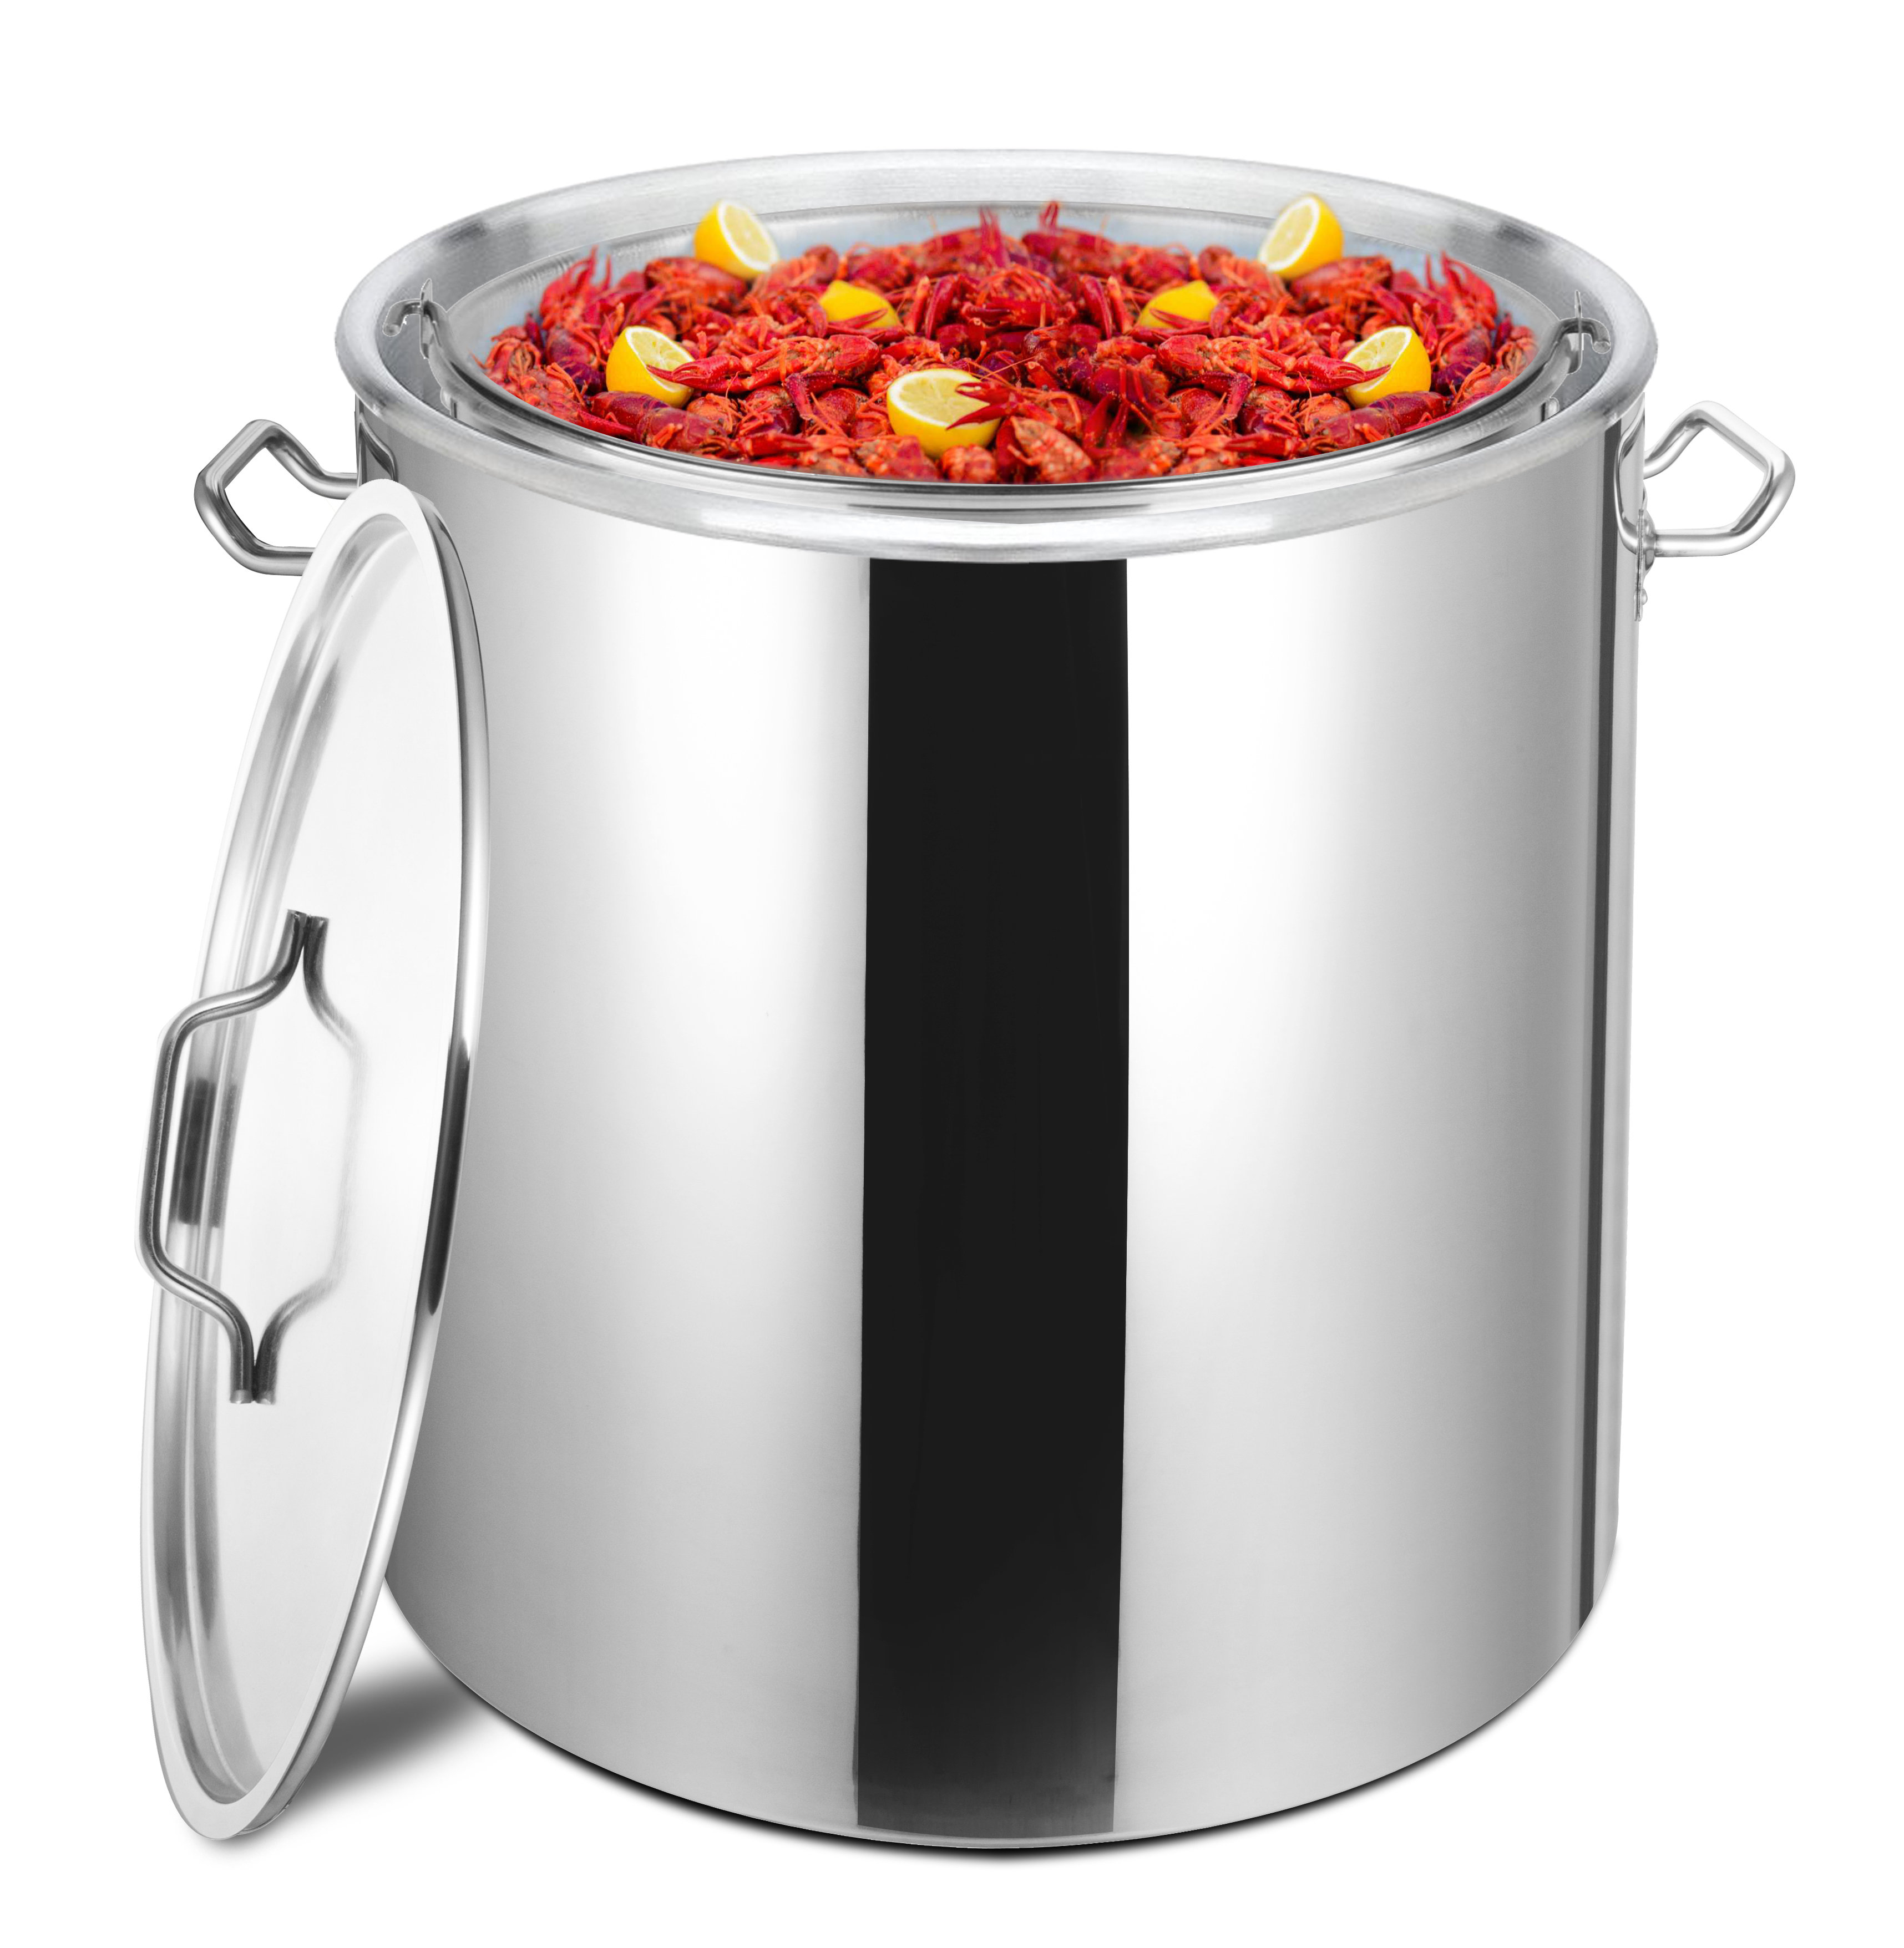 Concord Stock Pot with Lid - Size: 60 Quart